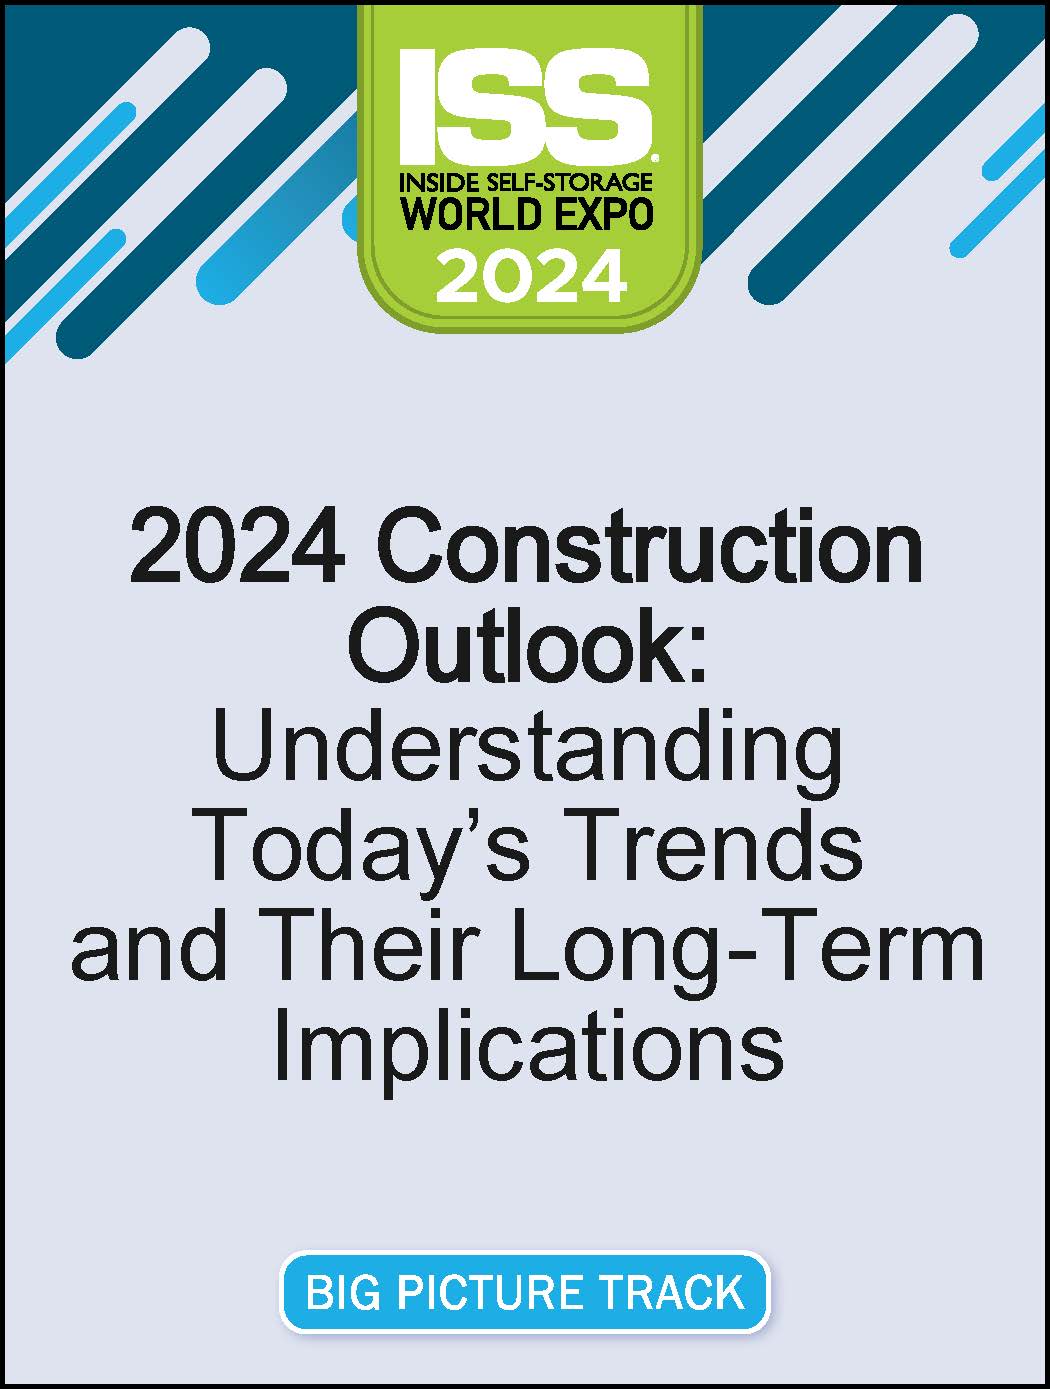 Video Pre-Order - 2024 Construction Outlook: Understanding Today’s Trends and Their Long-Term Implications